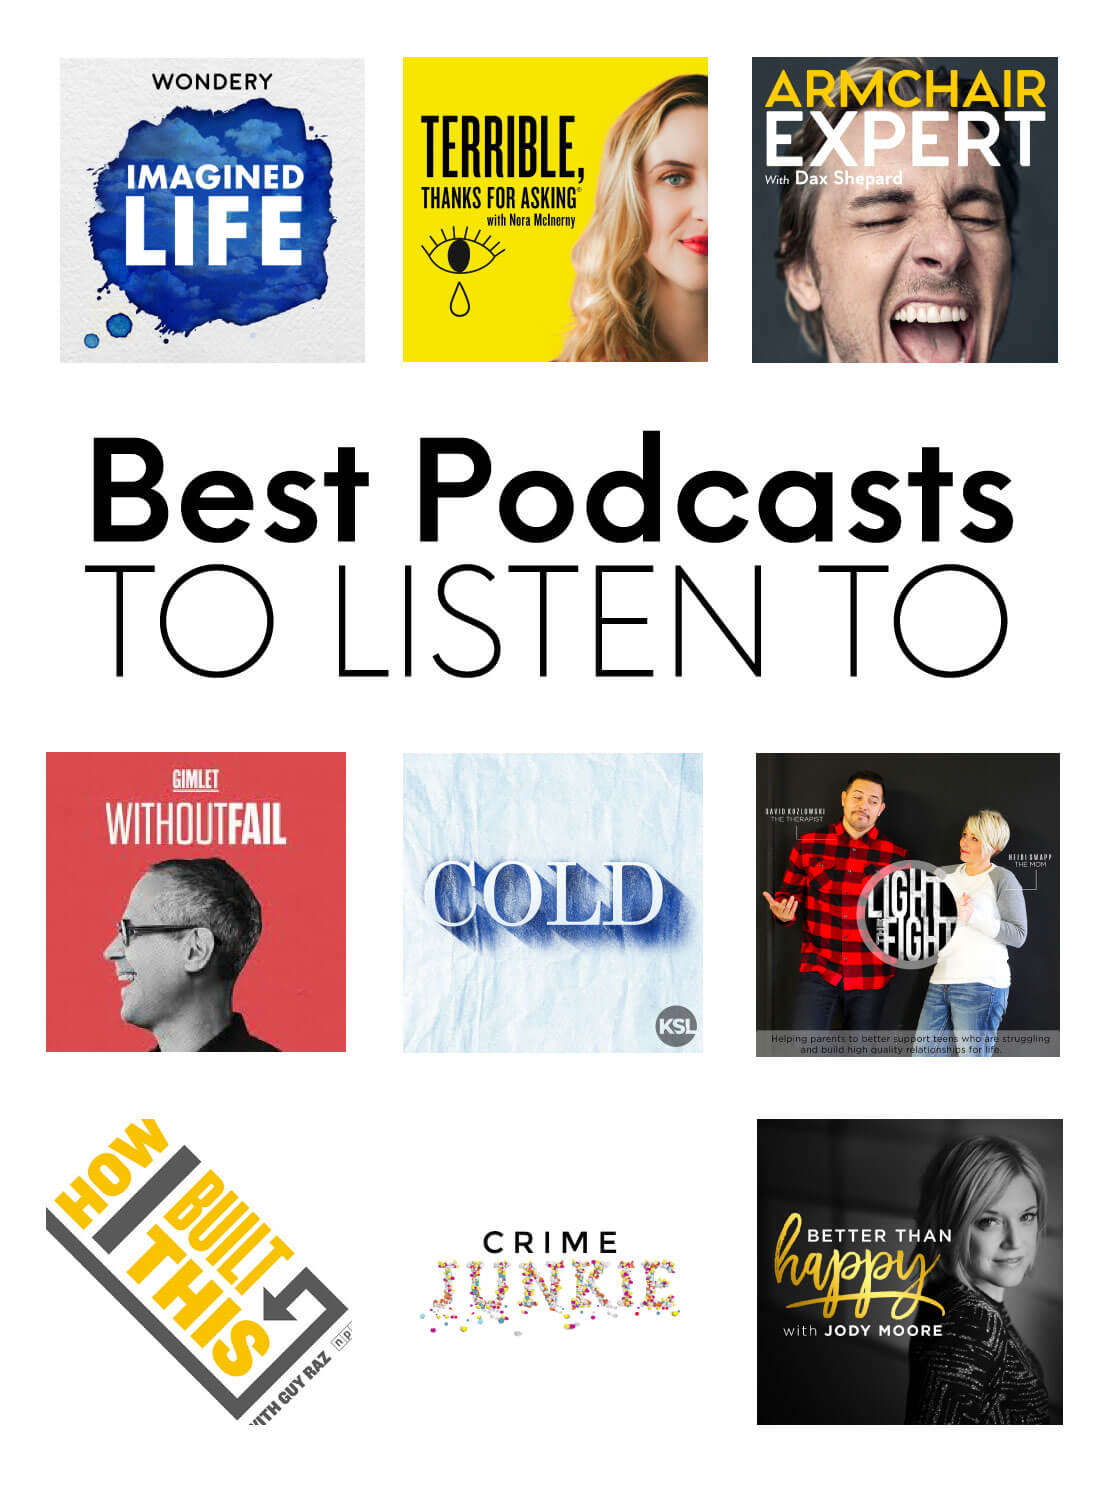 Best podcasts to listen to